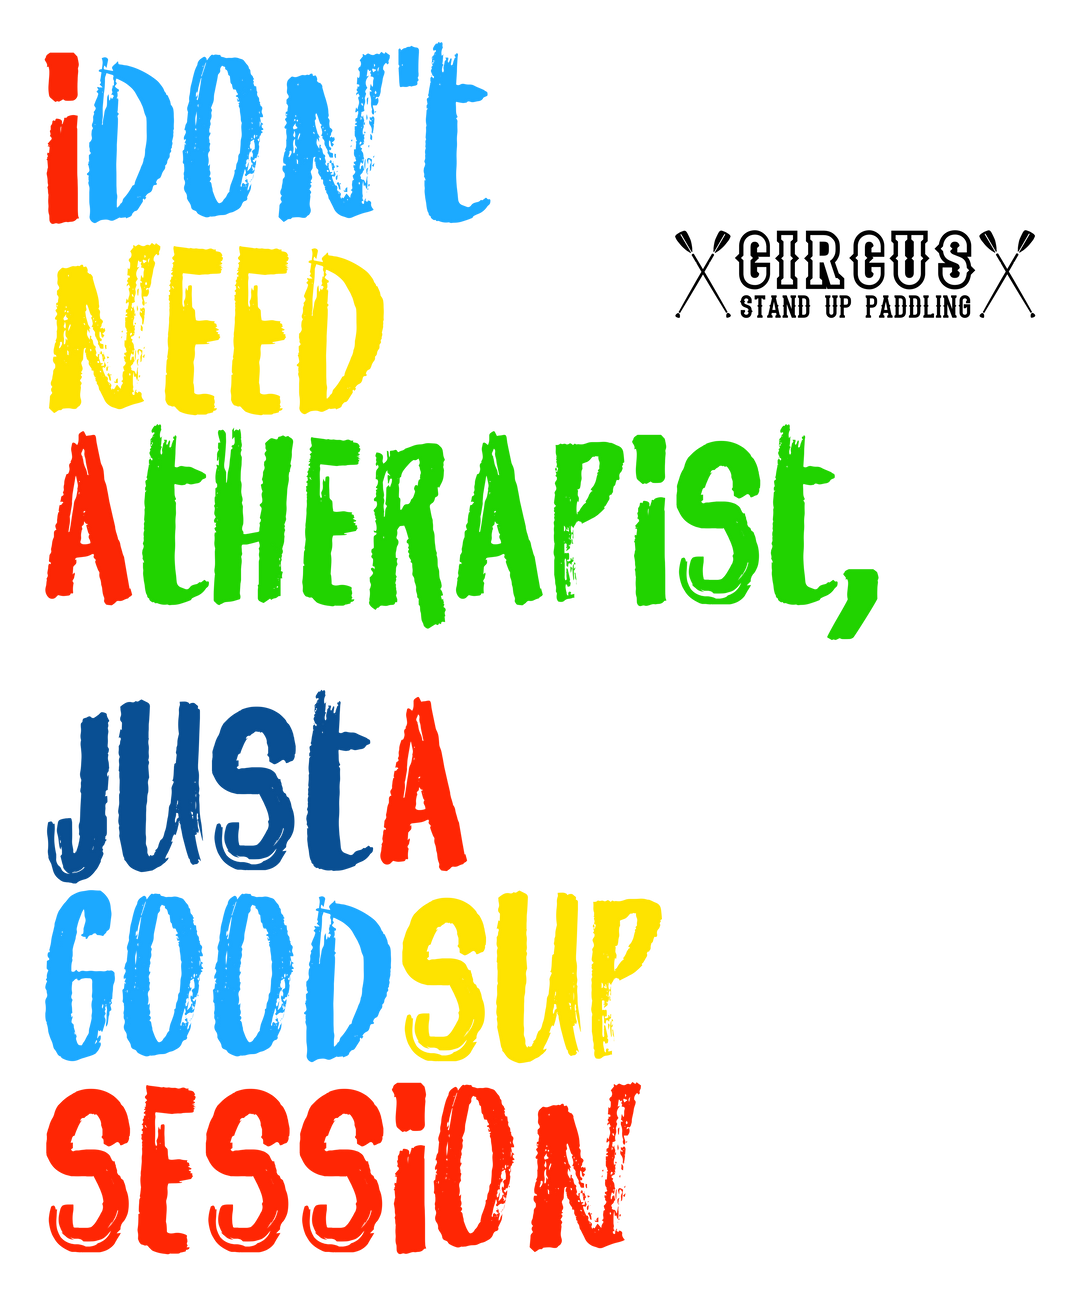 I don't need a therapist